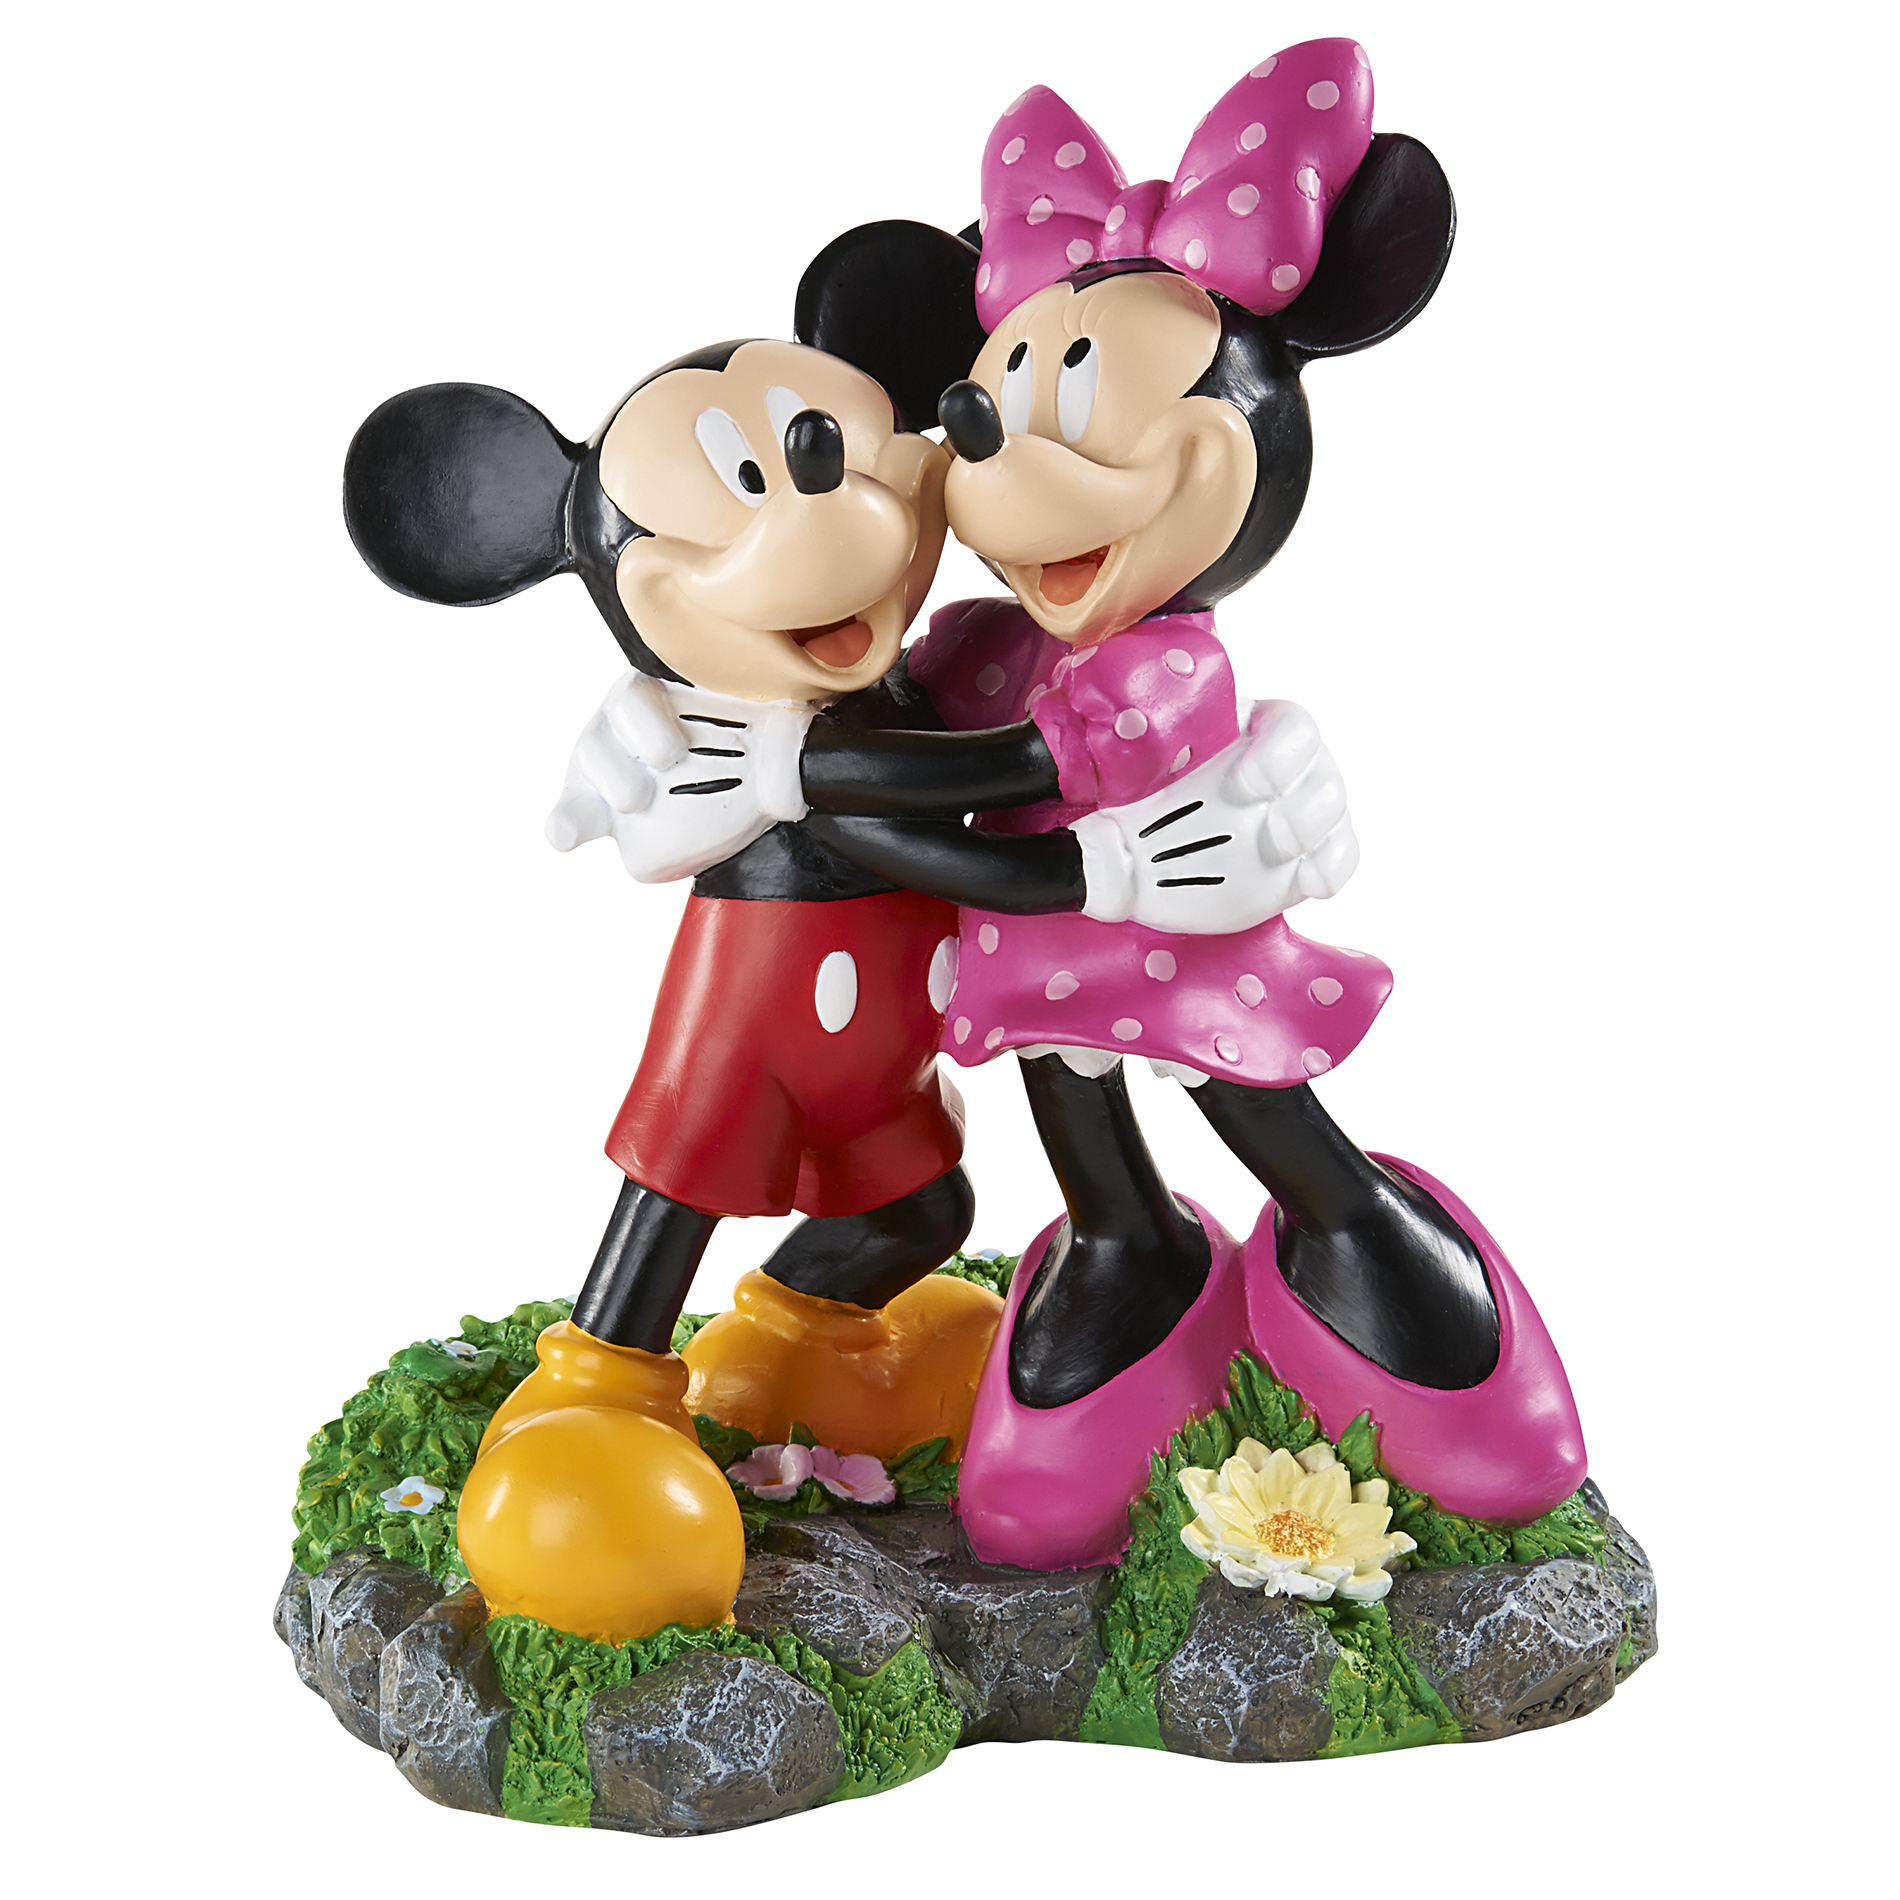 Disney Minnie Mouse Statue Outdoor Living Outdoor Decor Lawn